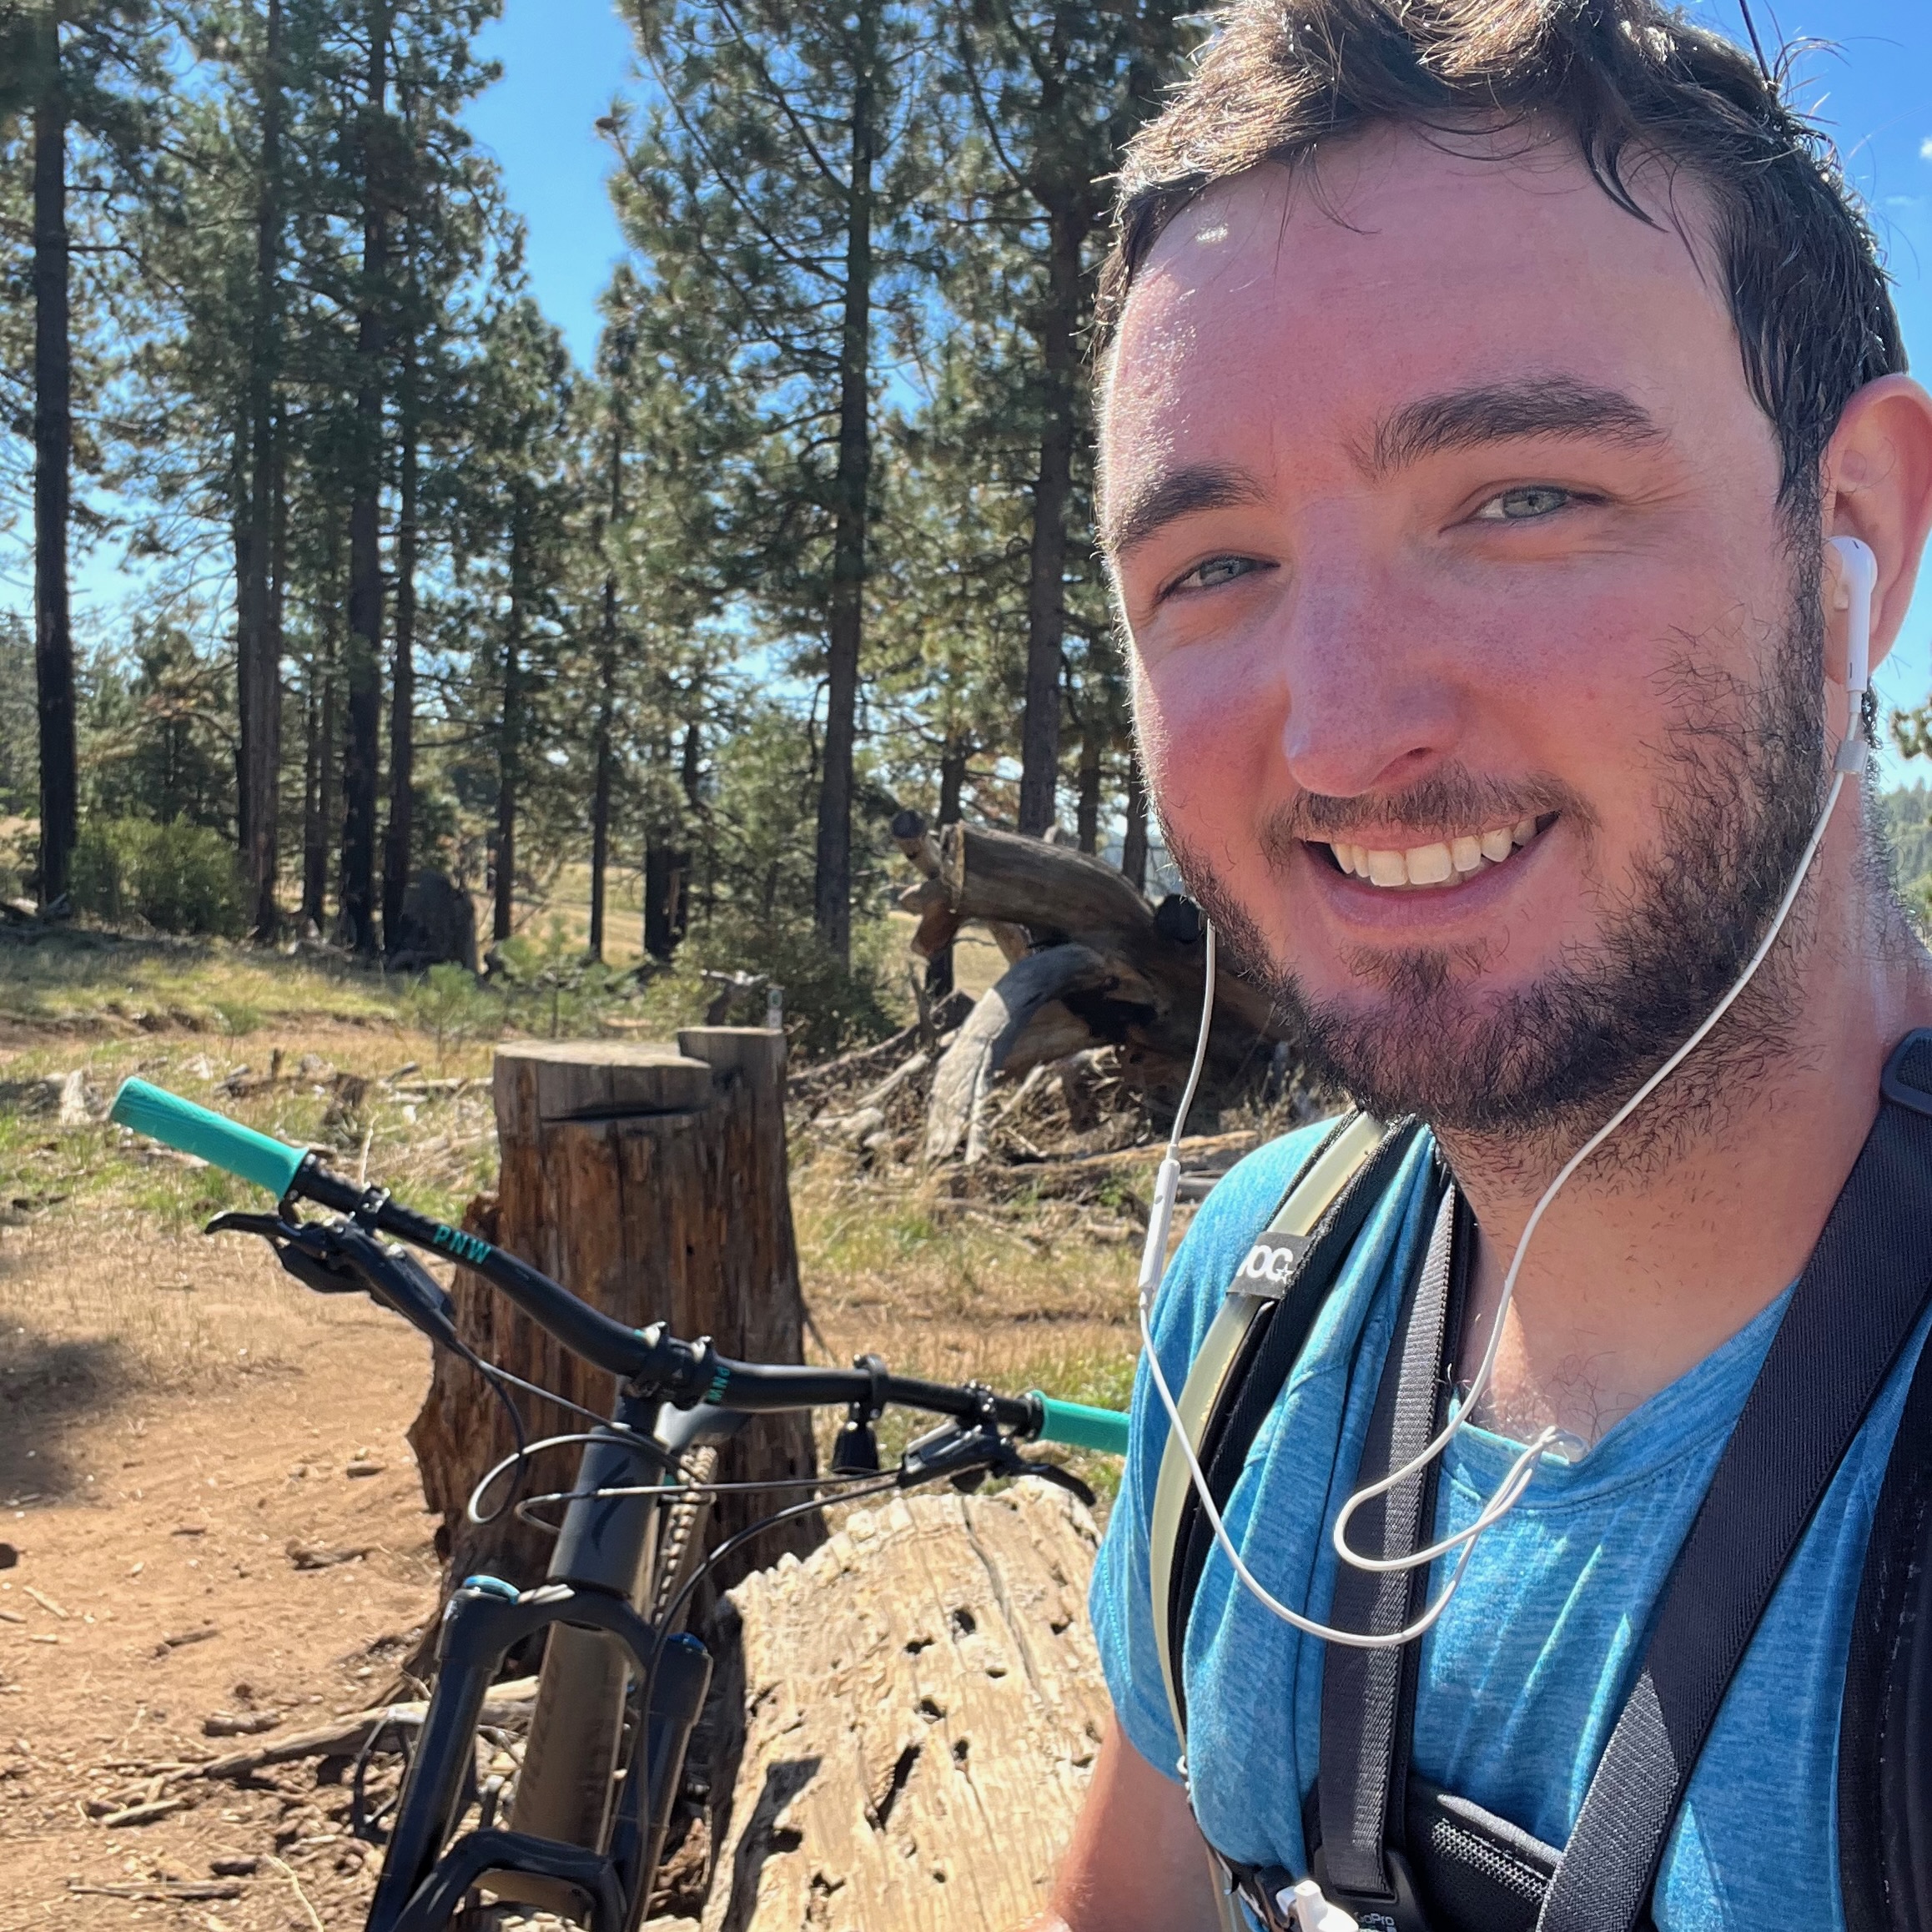 Selfie of the author with his mountain bike